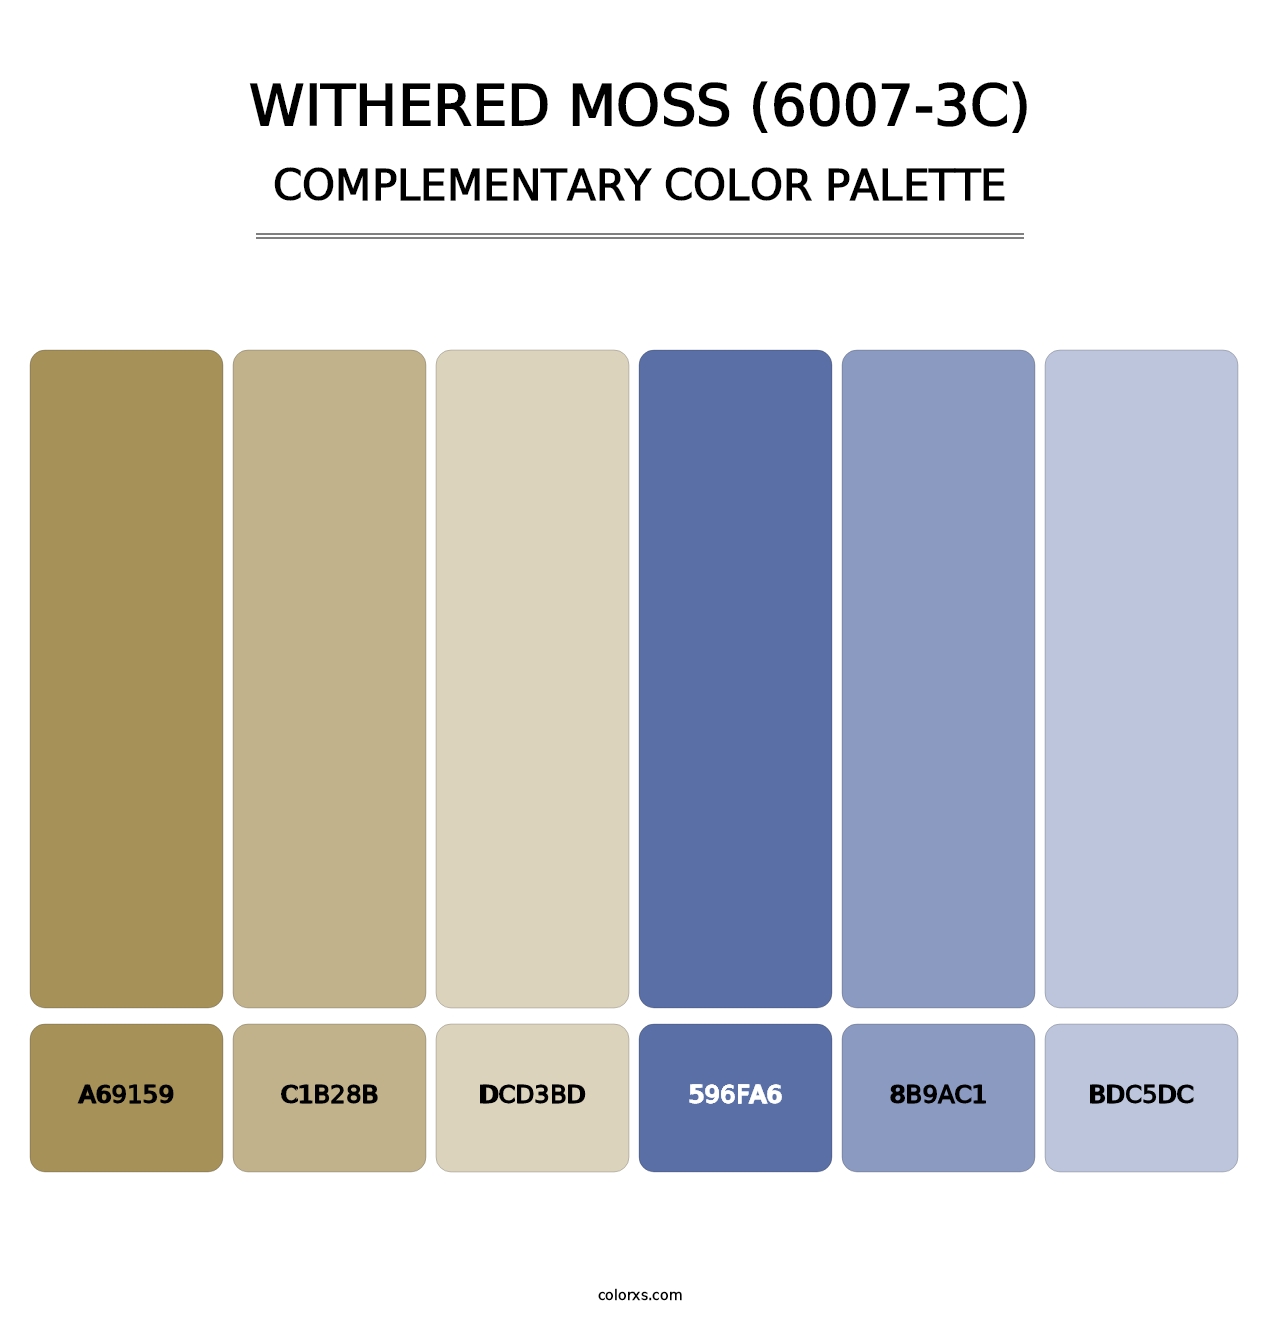 Withered Moss (6007-3C) - Complementary Color Palette